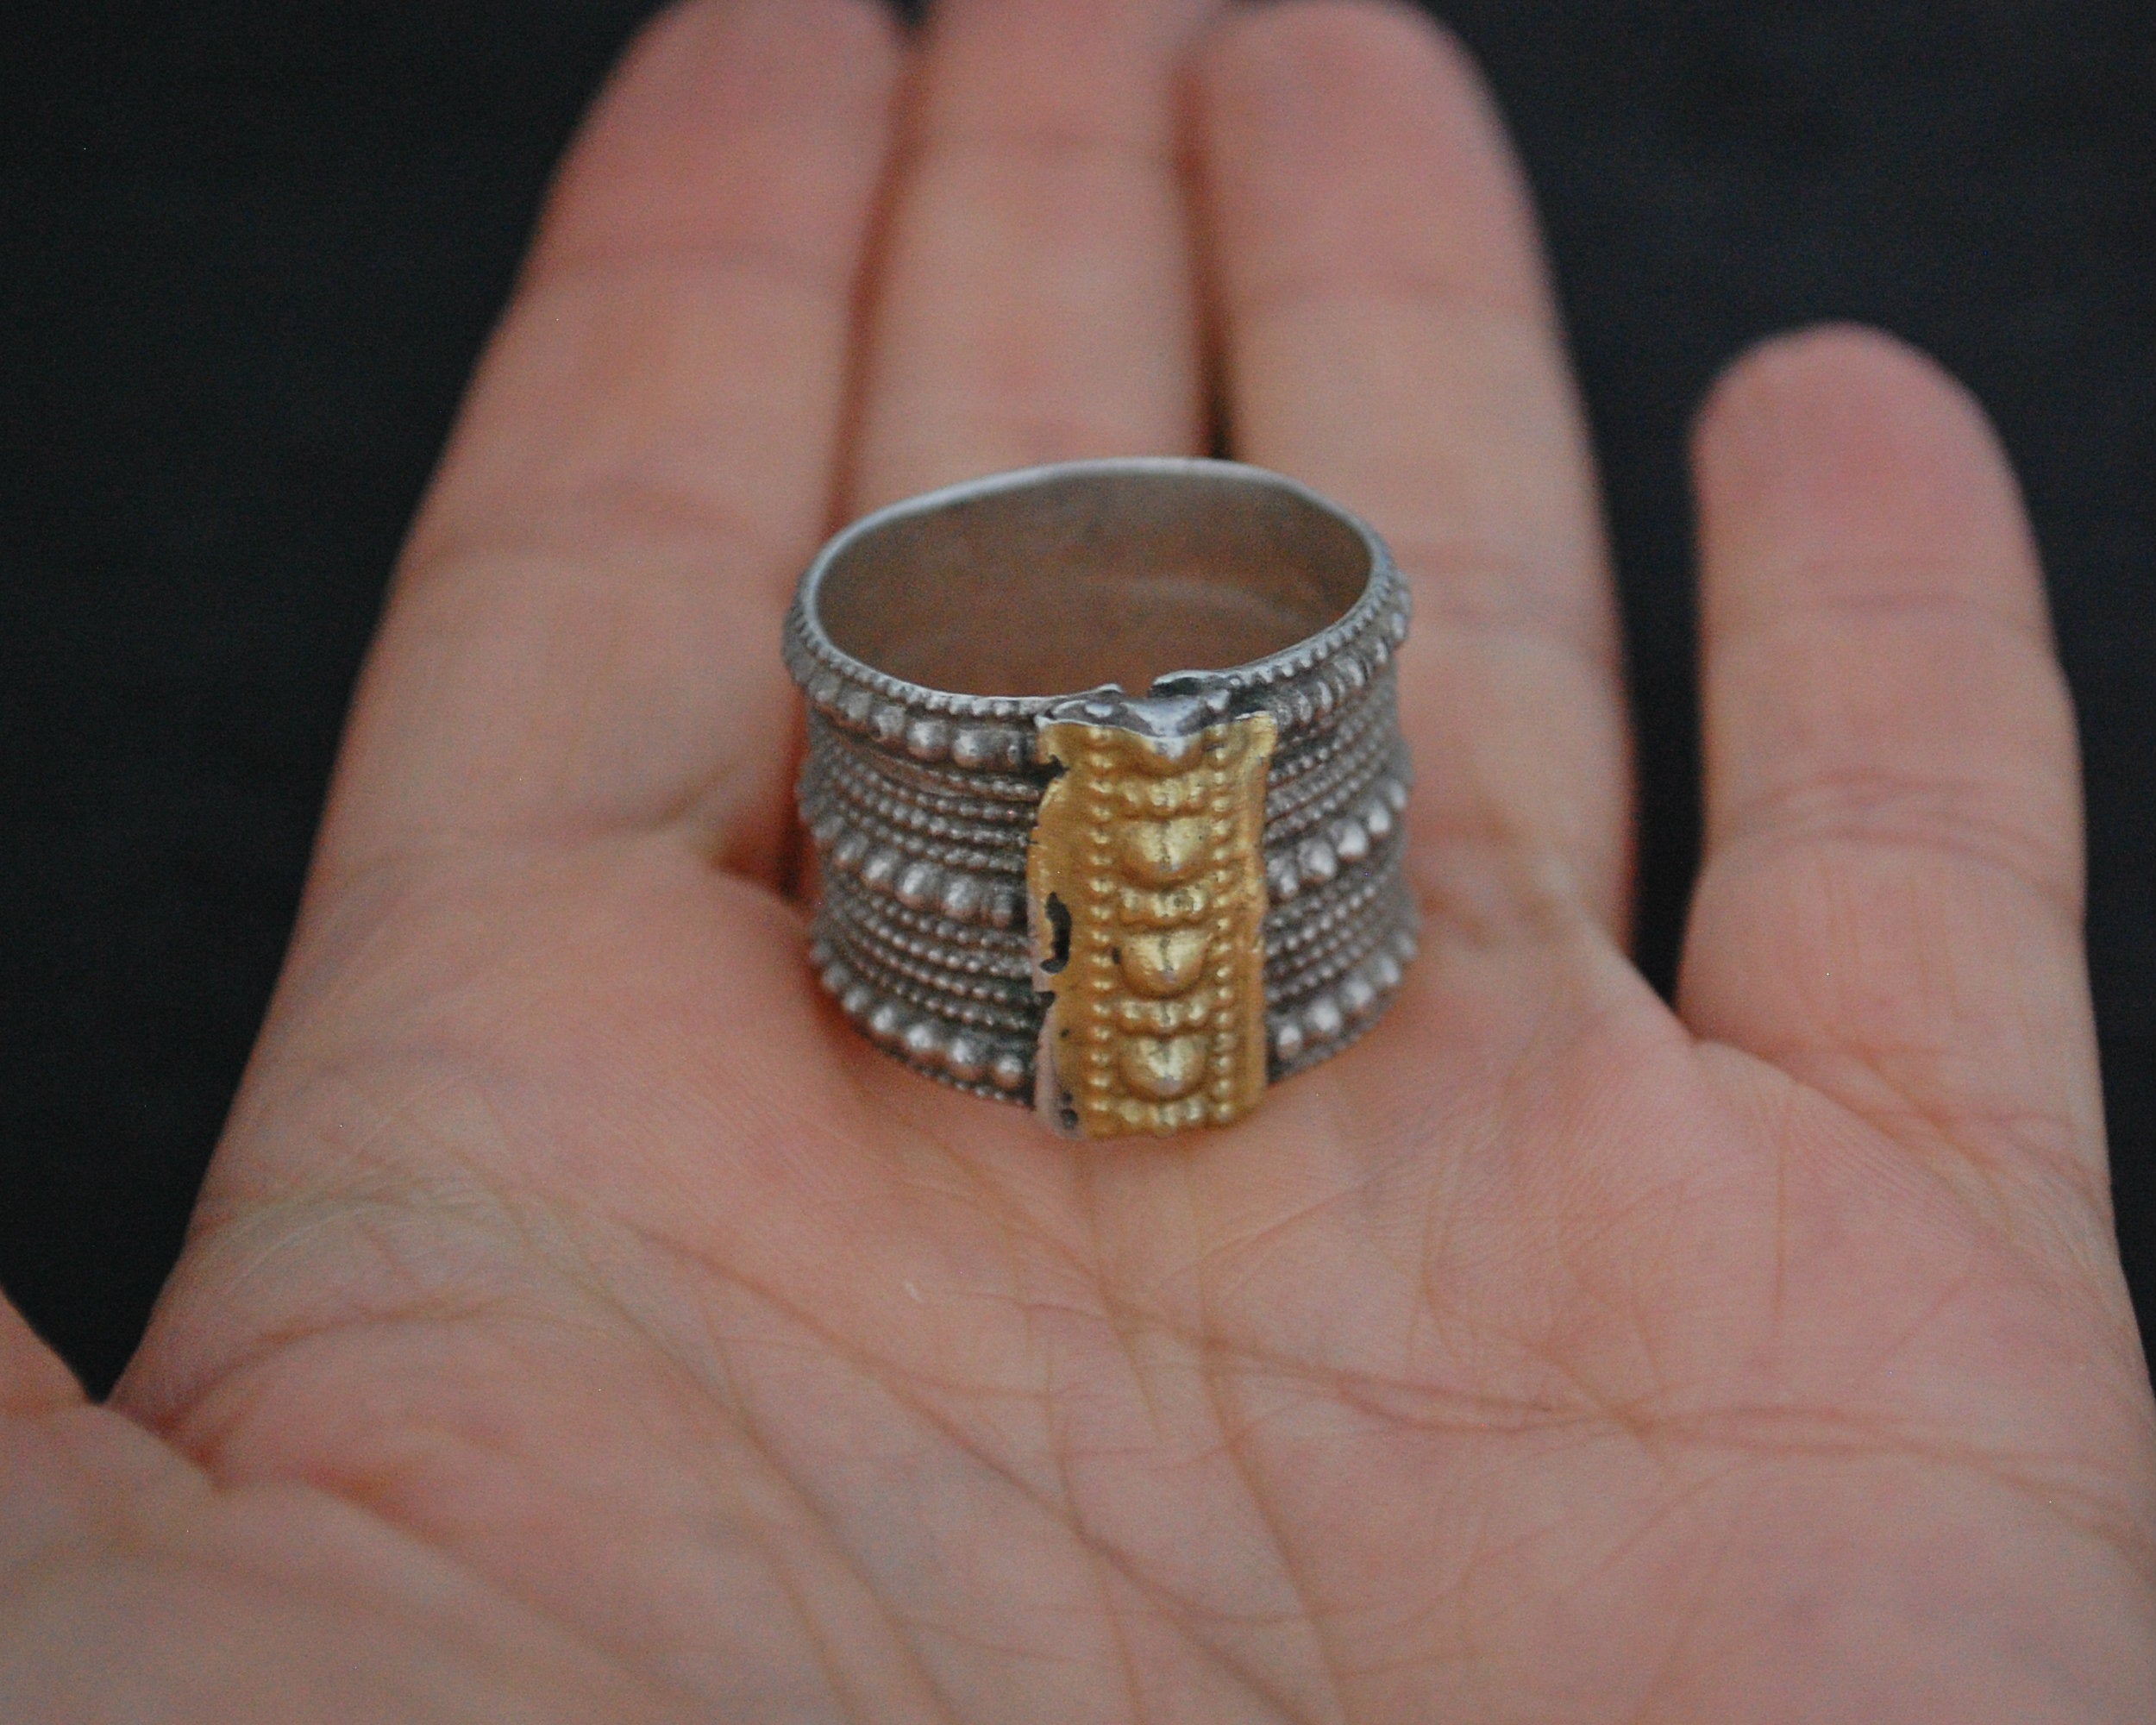 Antique Omani Silver Ring with Gilding - Size 10